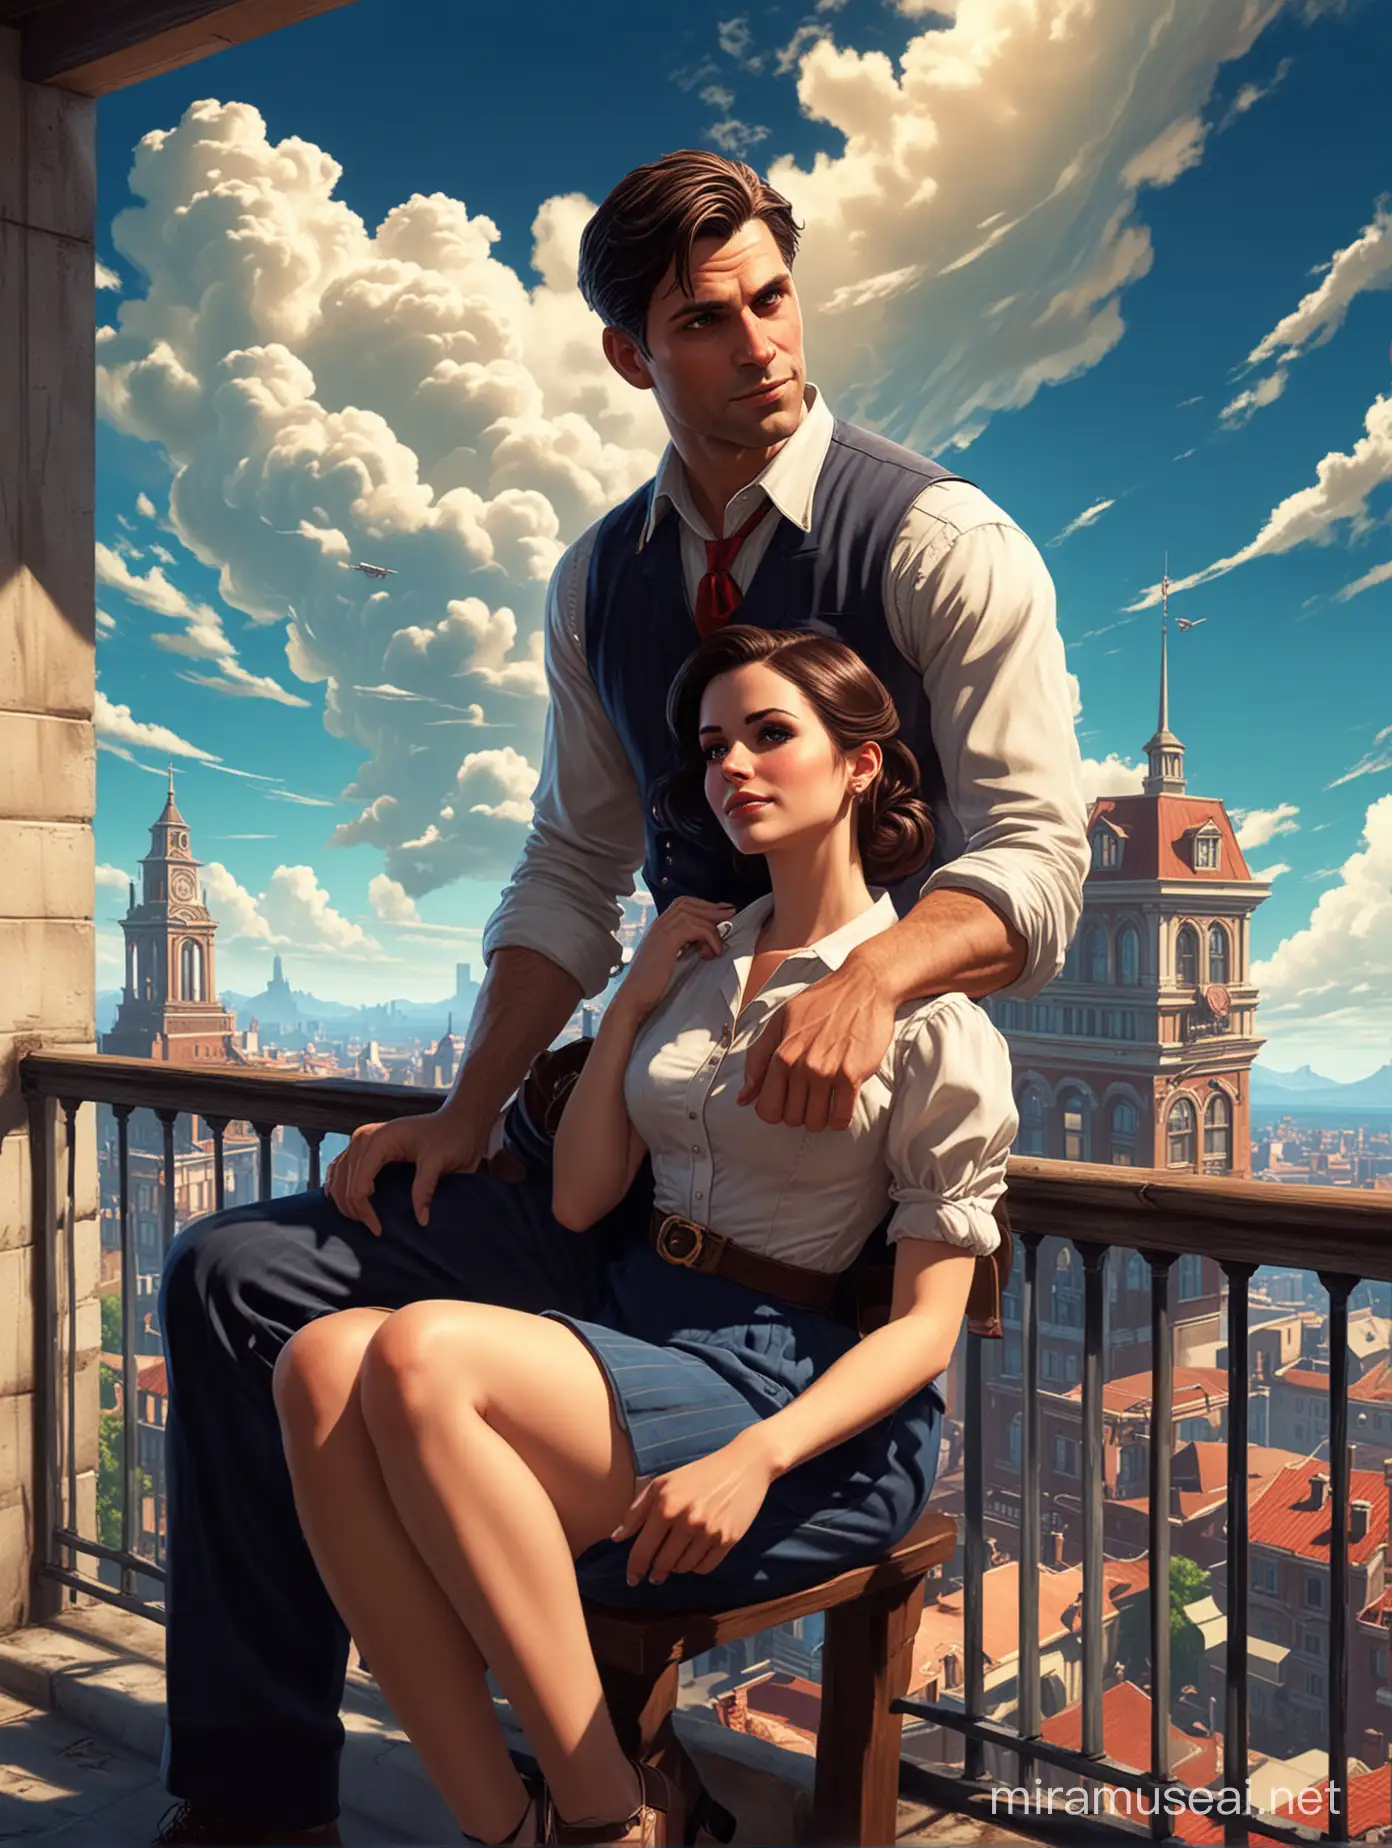 Booker dewitt from bioshock infinite and lana Del rey sitting on his lap on Balcony columbia city clouds blue sky background 